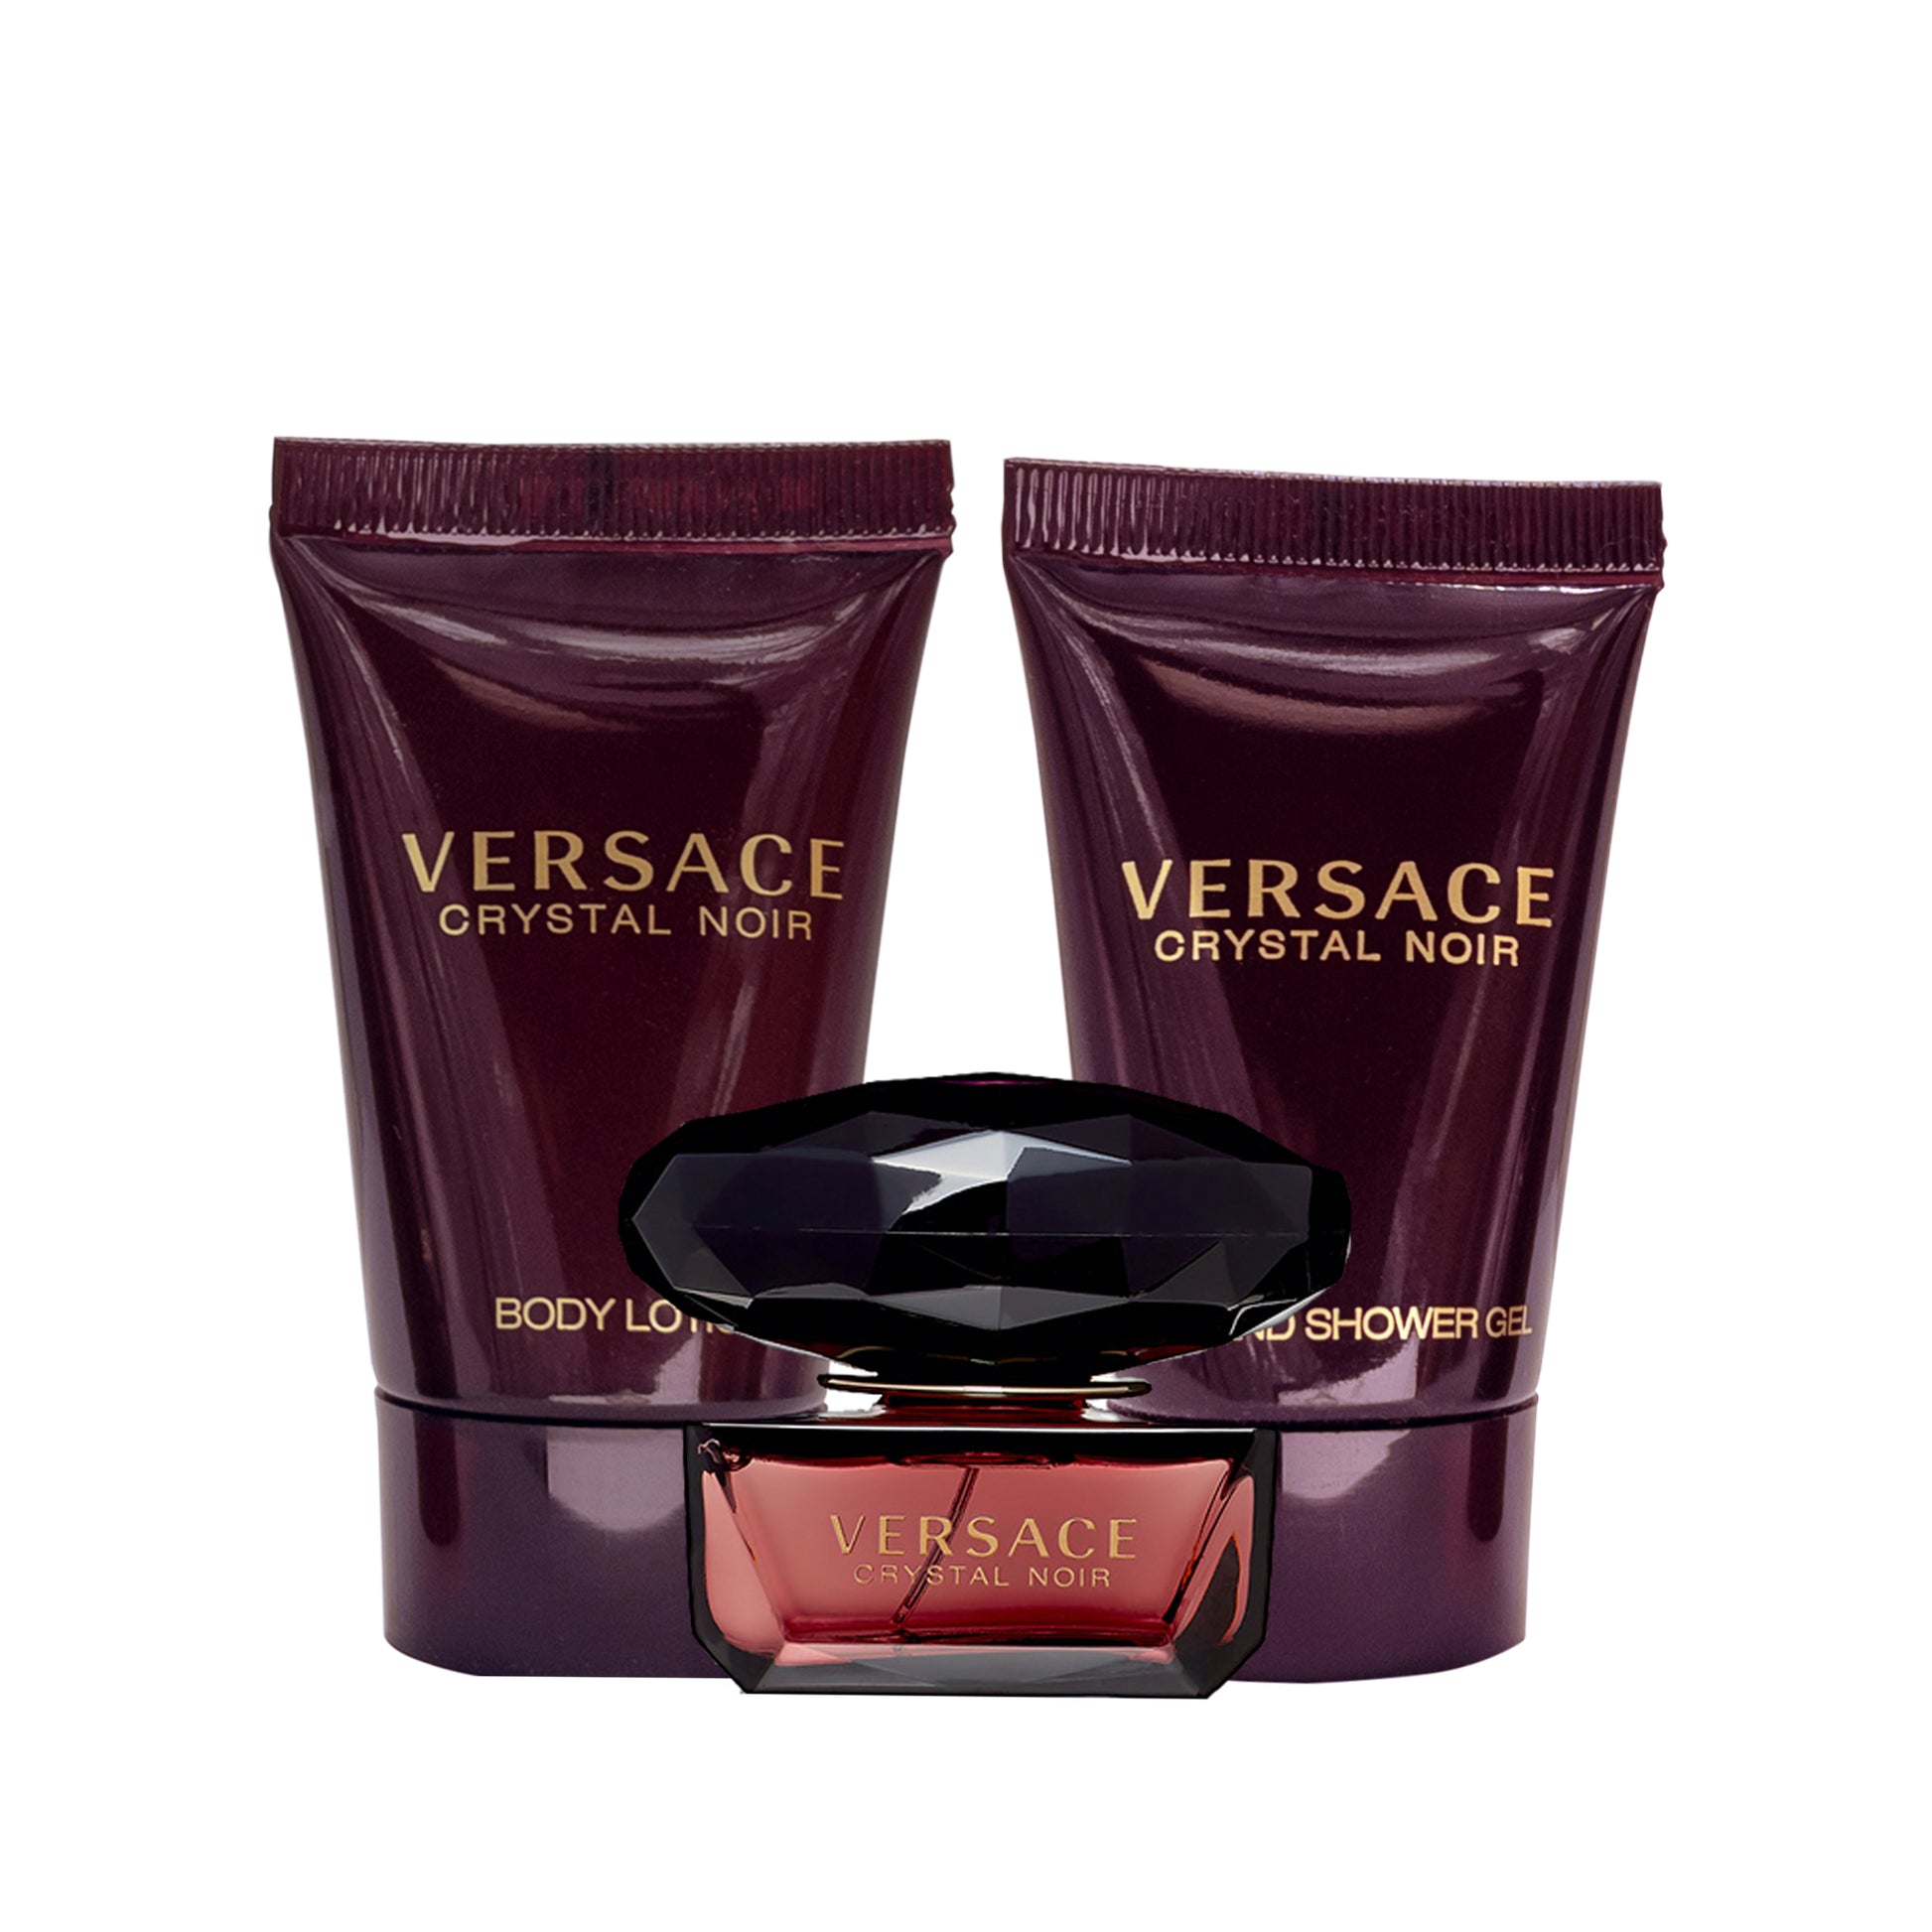 Versace Crystal Noir by Versace for Women - 3 Pc Mini Gift Set 5ml EDT Splash, 0.8oz Bath and Show Click to open in modal